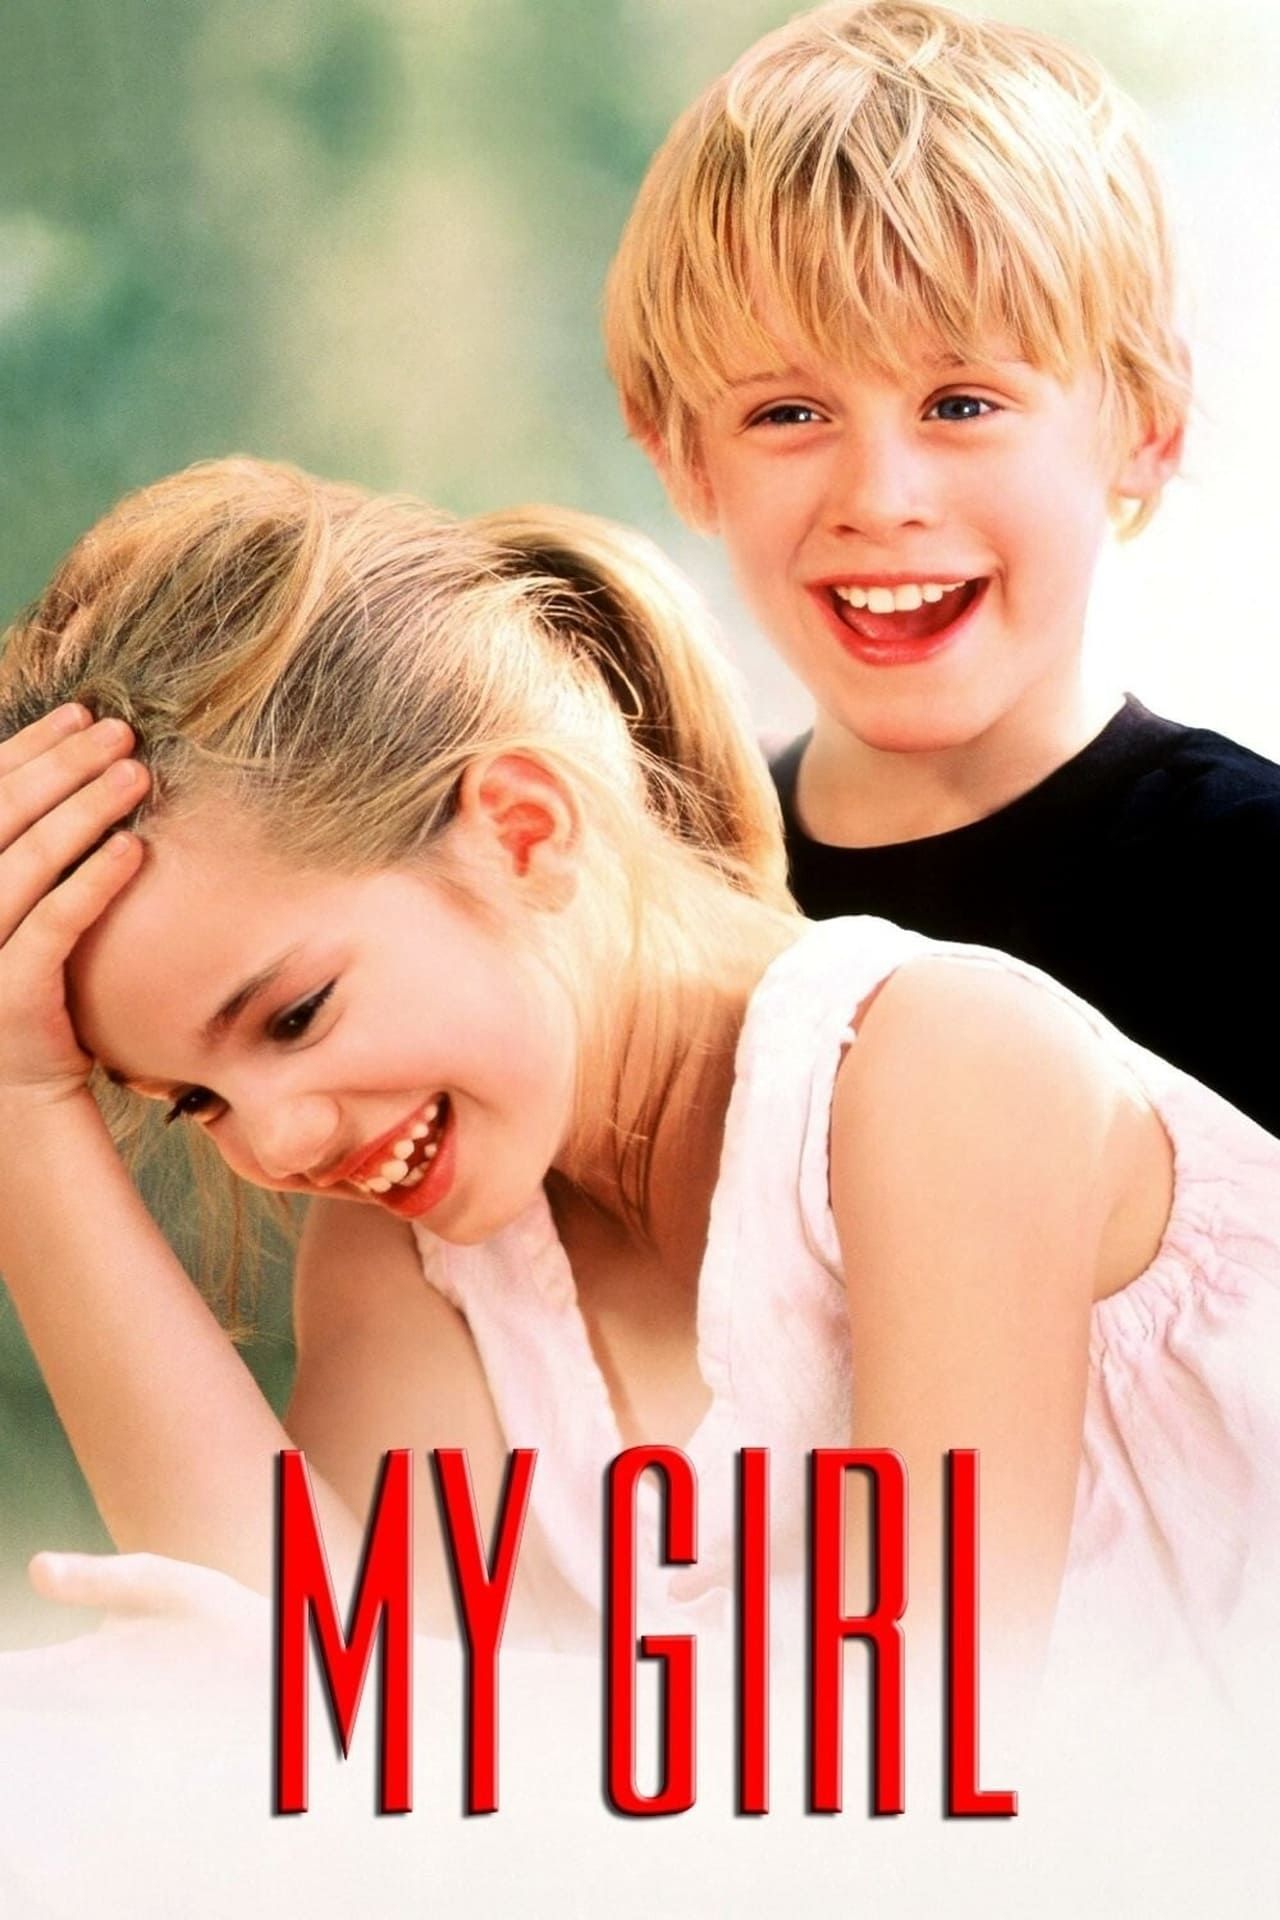 My Girl Movie Poster Showing Macaulay Culkin and Anna Chlumskhy as Thomas J. Sennett and Vada Sultenfuss